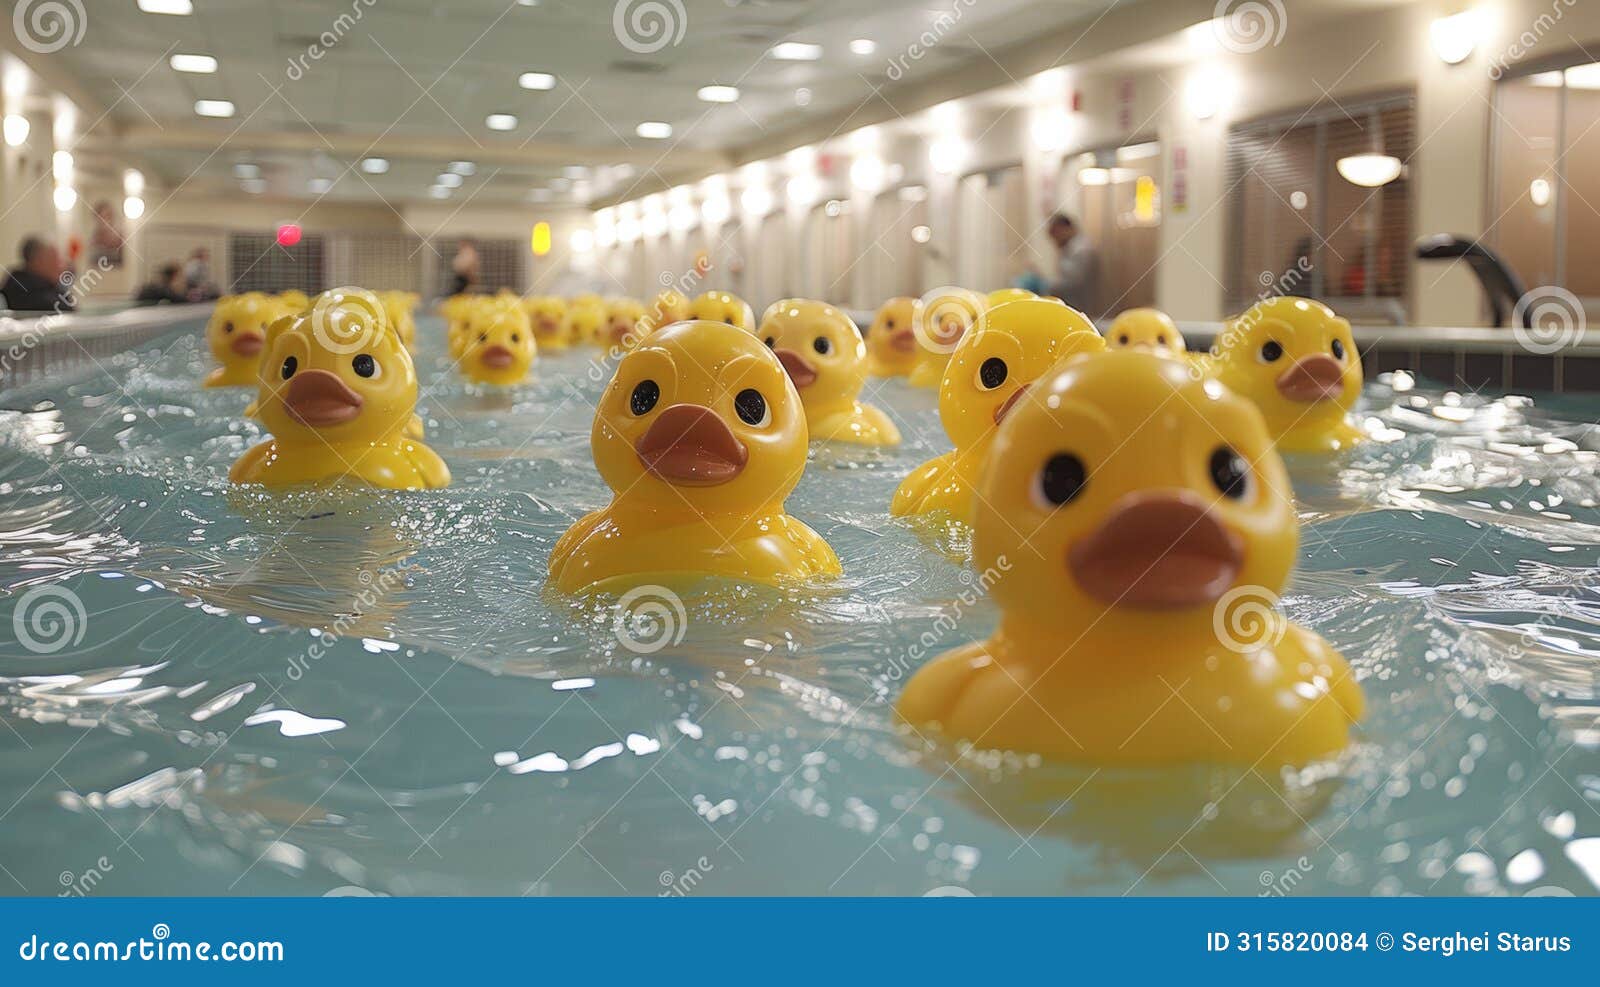 a group of rubber ducks floating in a pool with other rubber duckies, ai